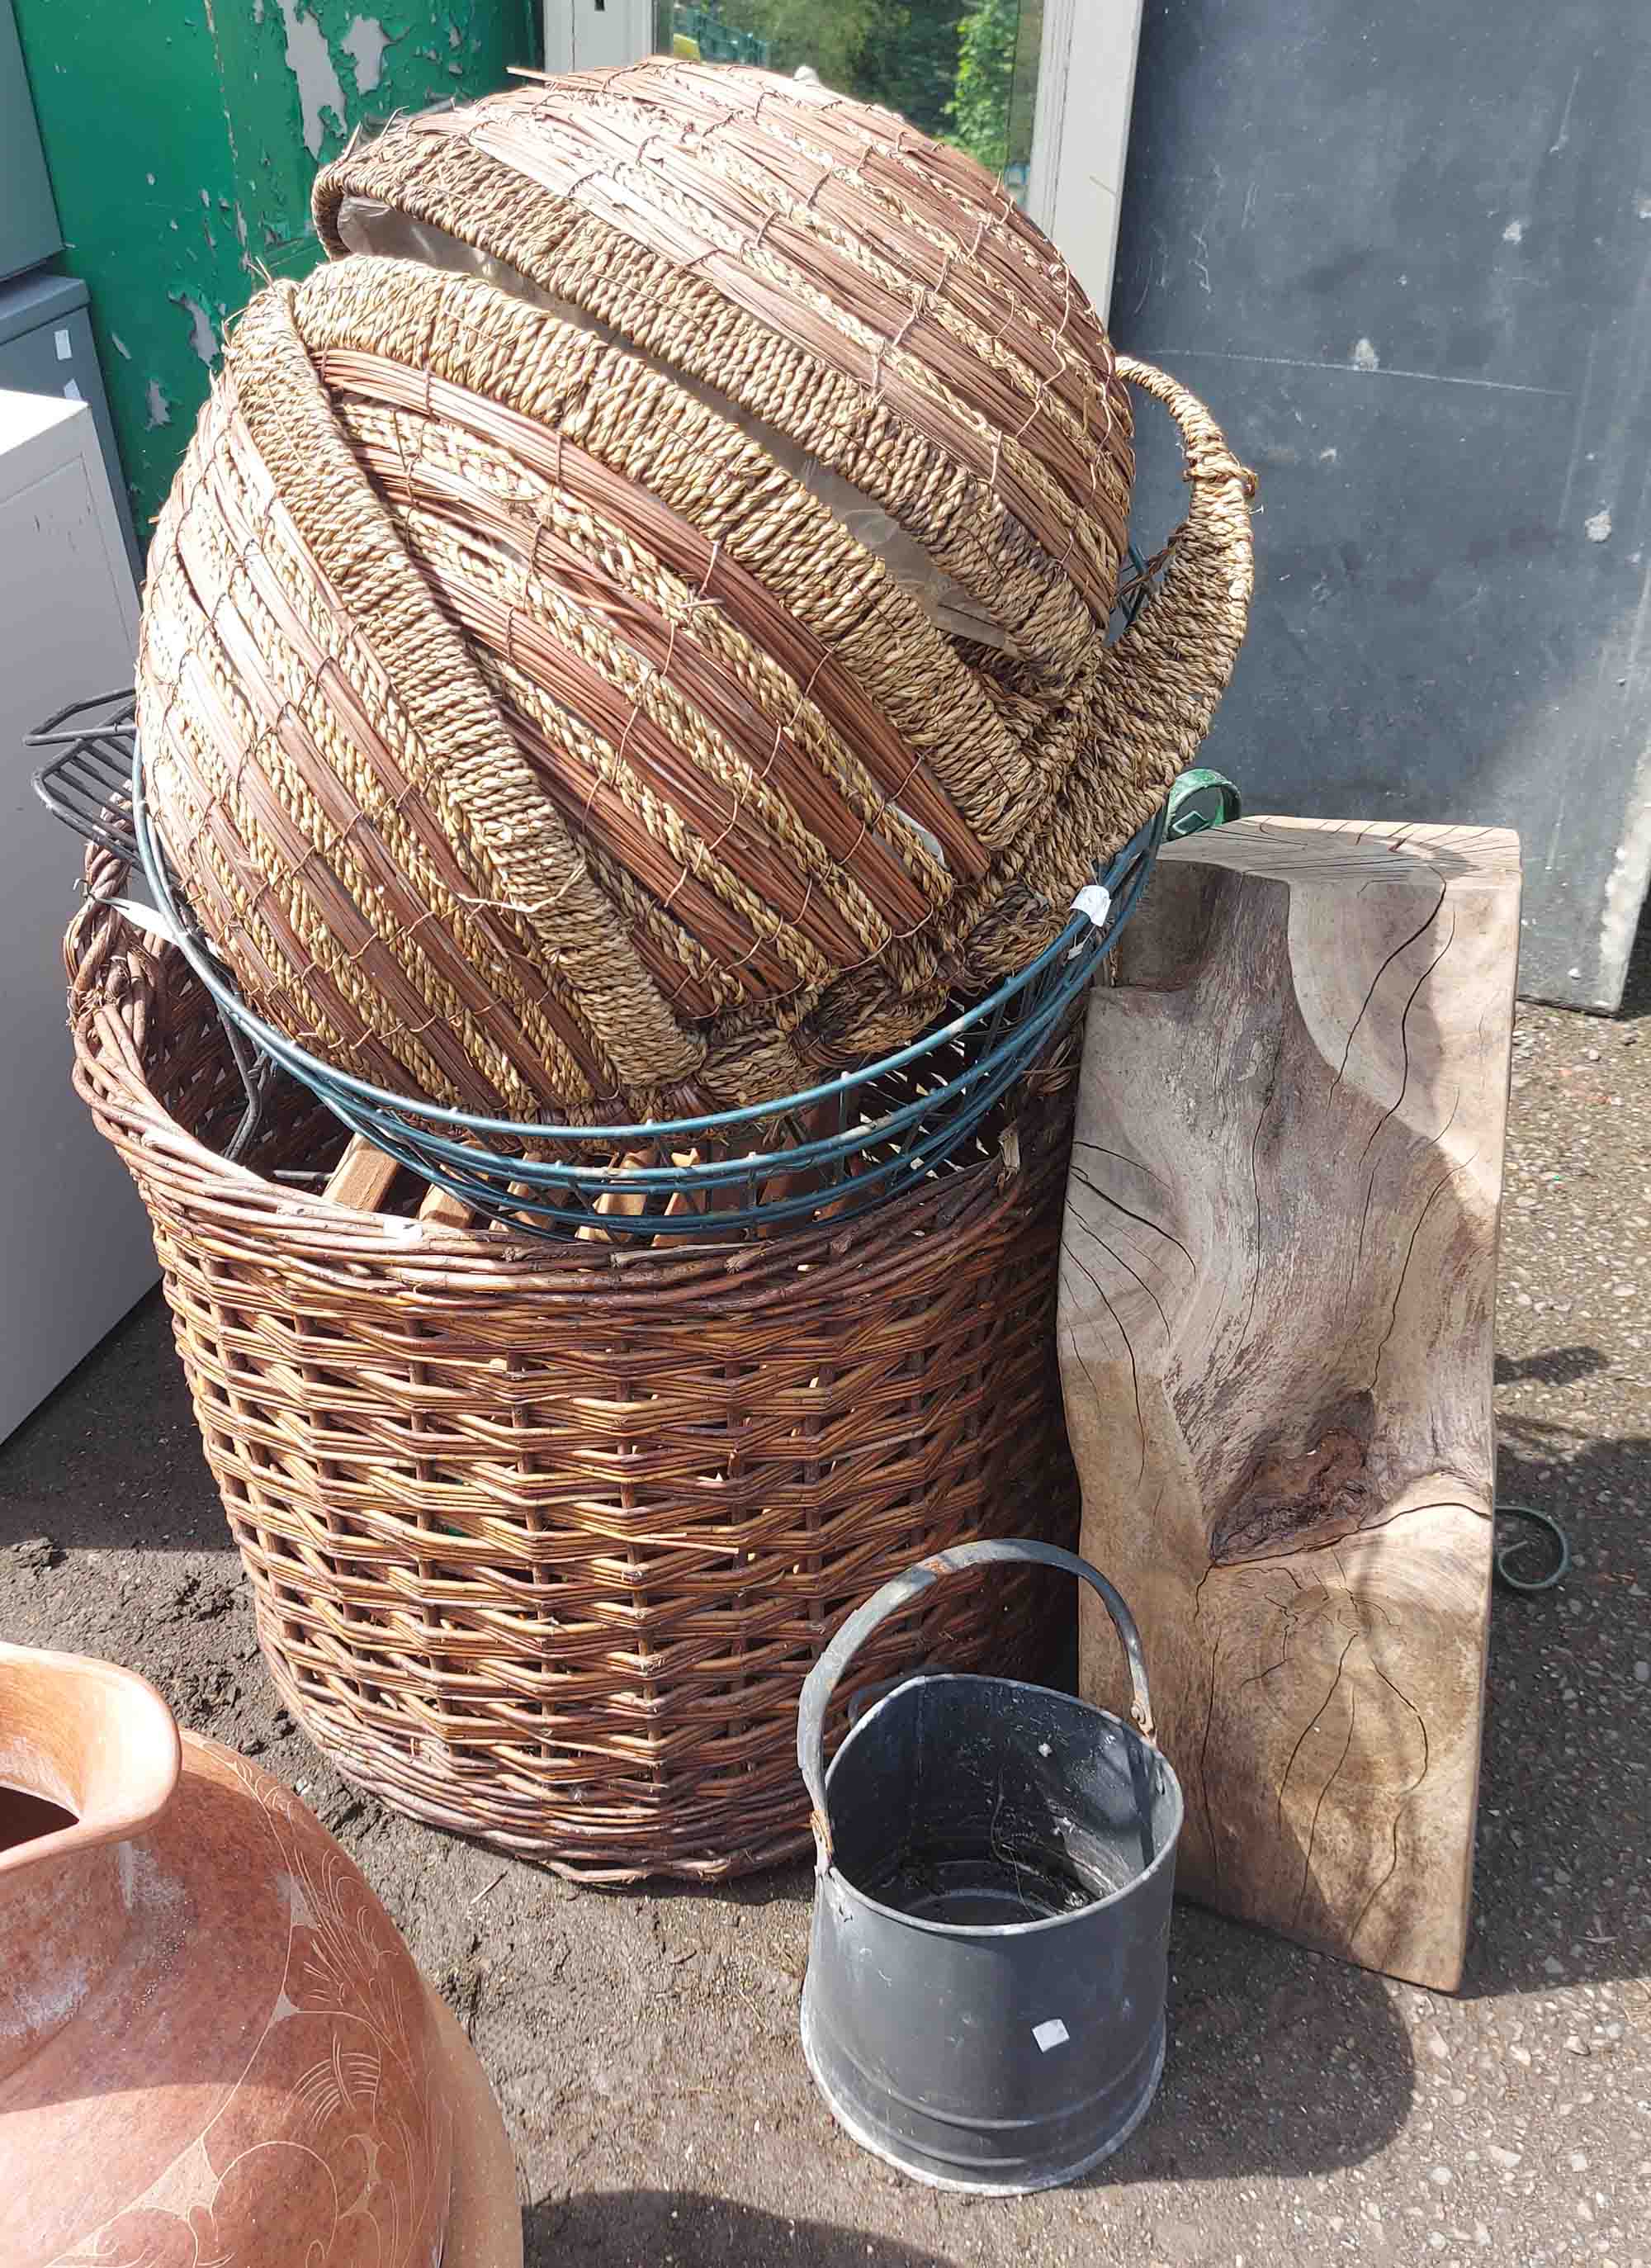 A large wicker baskets a Christmas tree stand, wood block, etc.